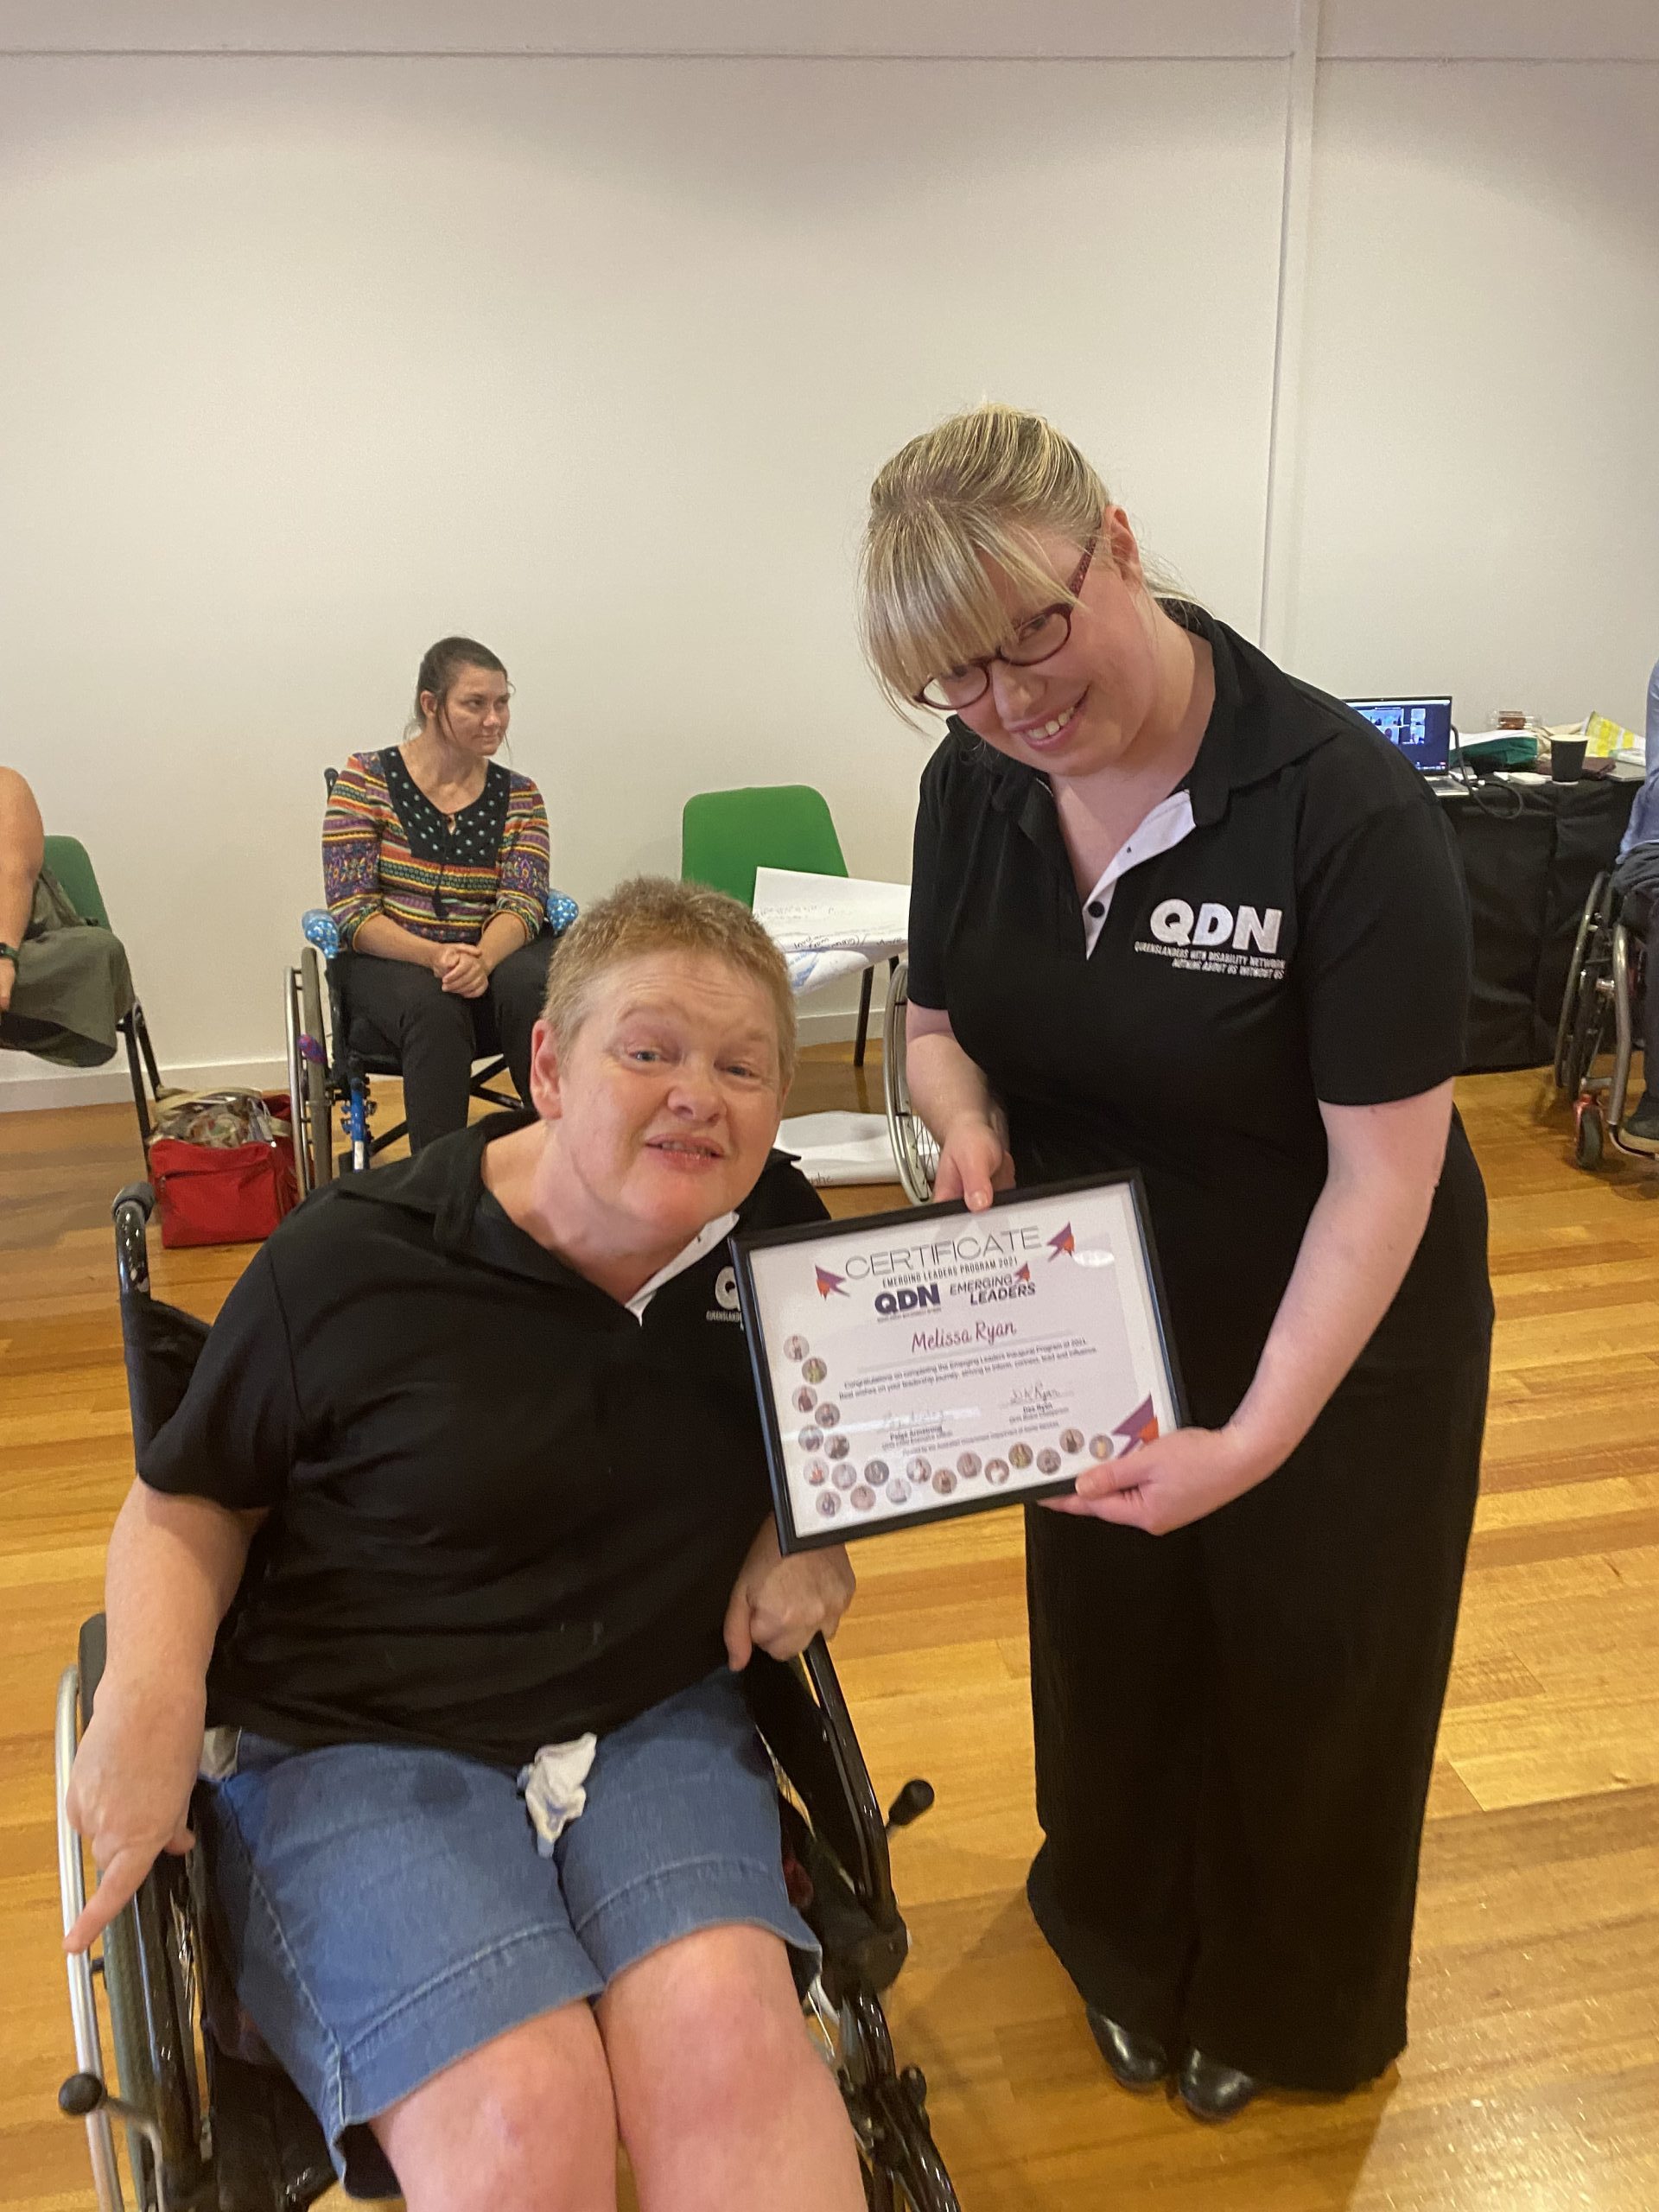 Two ladies in QDN shirts, one in a wheelchair and one standing. They are holding a framed certificate and looking at the camera smiling.